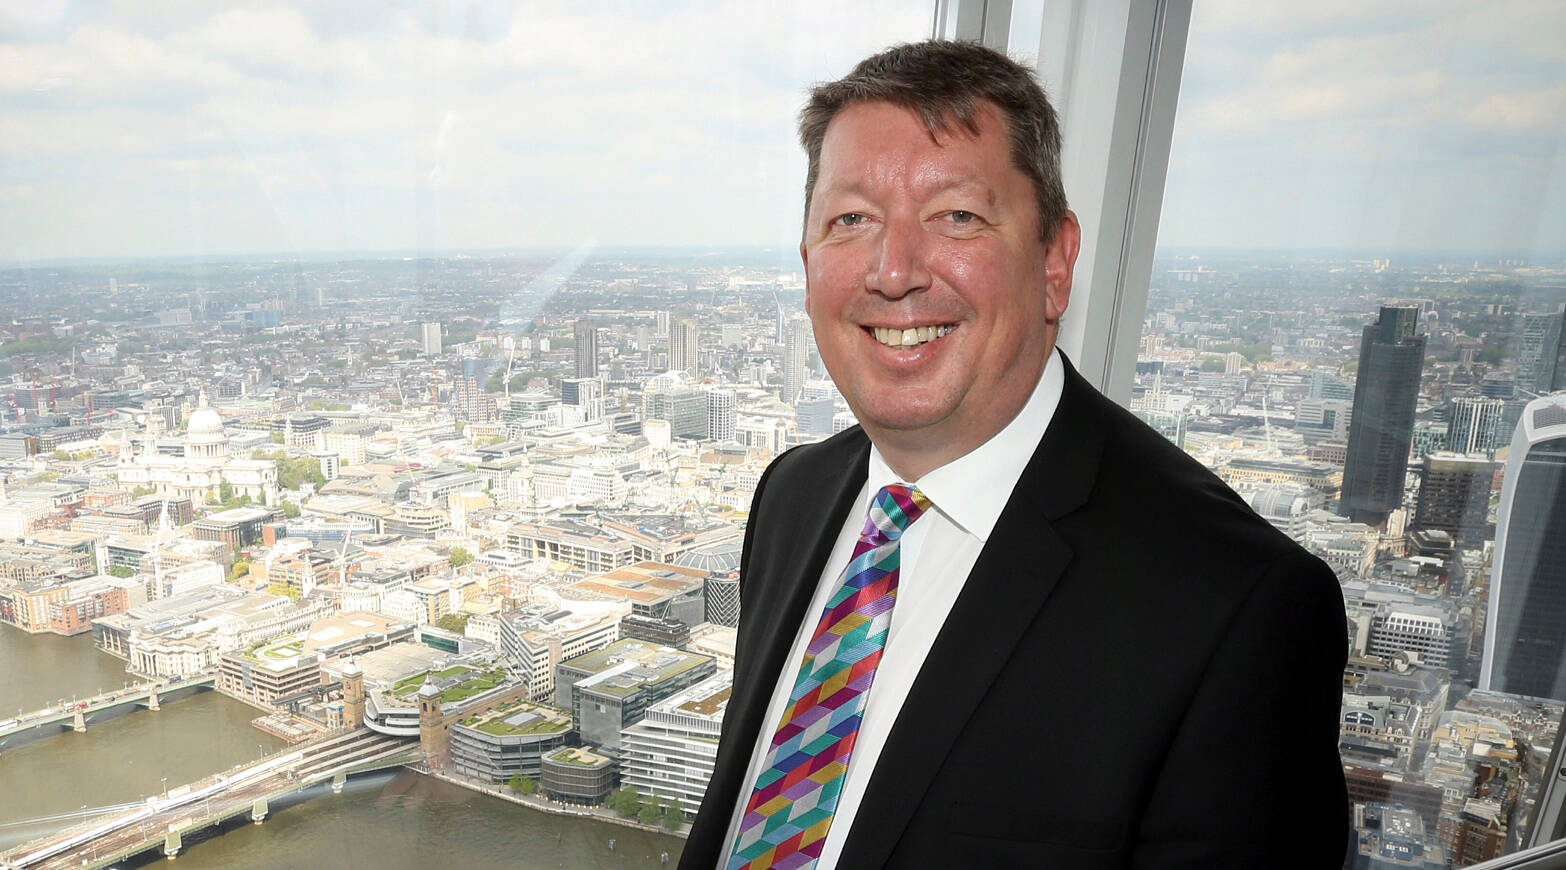 Interview: Martin Baggs, former chief executive, Thames Water